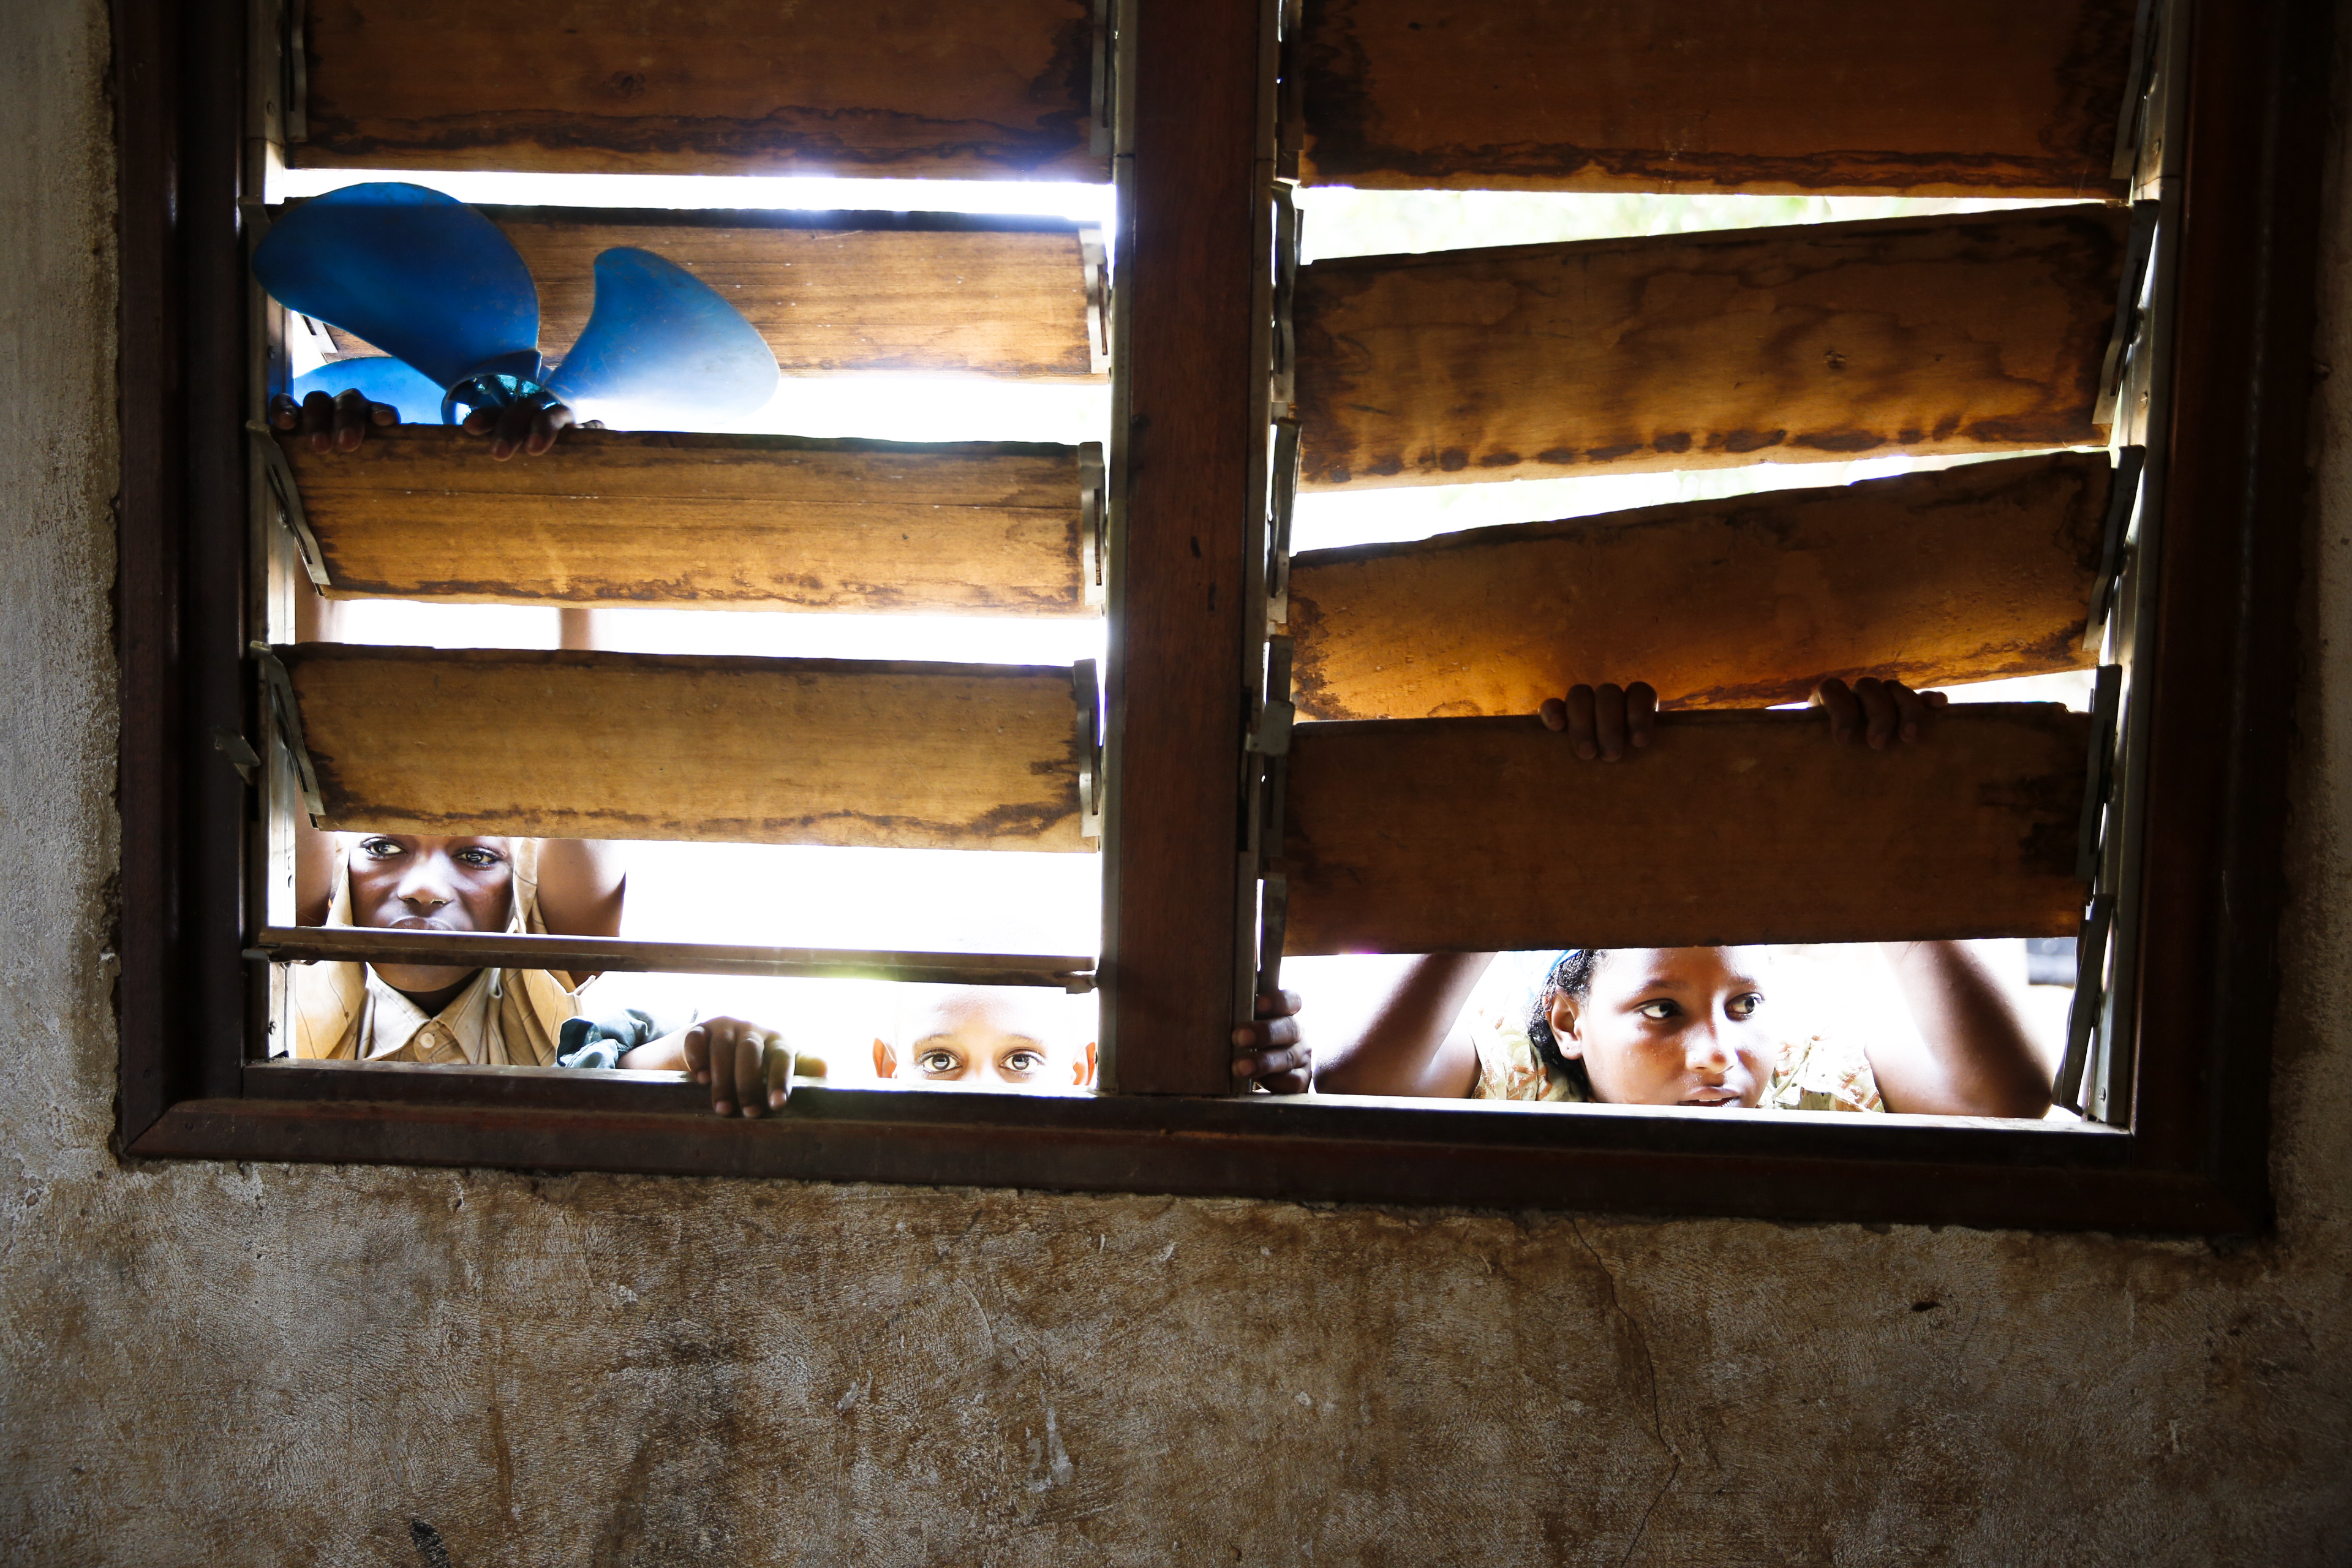 Mar. 27, 2014. Children peer through the blinds of a back room of the mosque in the Muslim enclave of Begoua, in the PK12 area, on the day that aid workers document malnourished children. Some 2,000 Muslims, mostly Peuhl, have taken refuge at the mosque. In PK12, there is limited access to food and medical care.